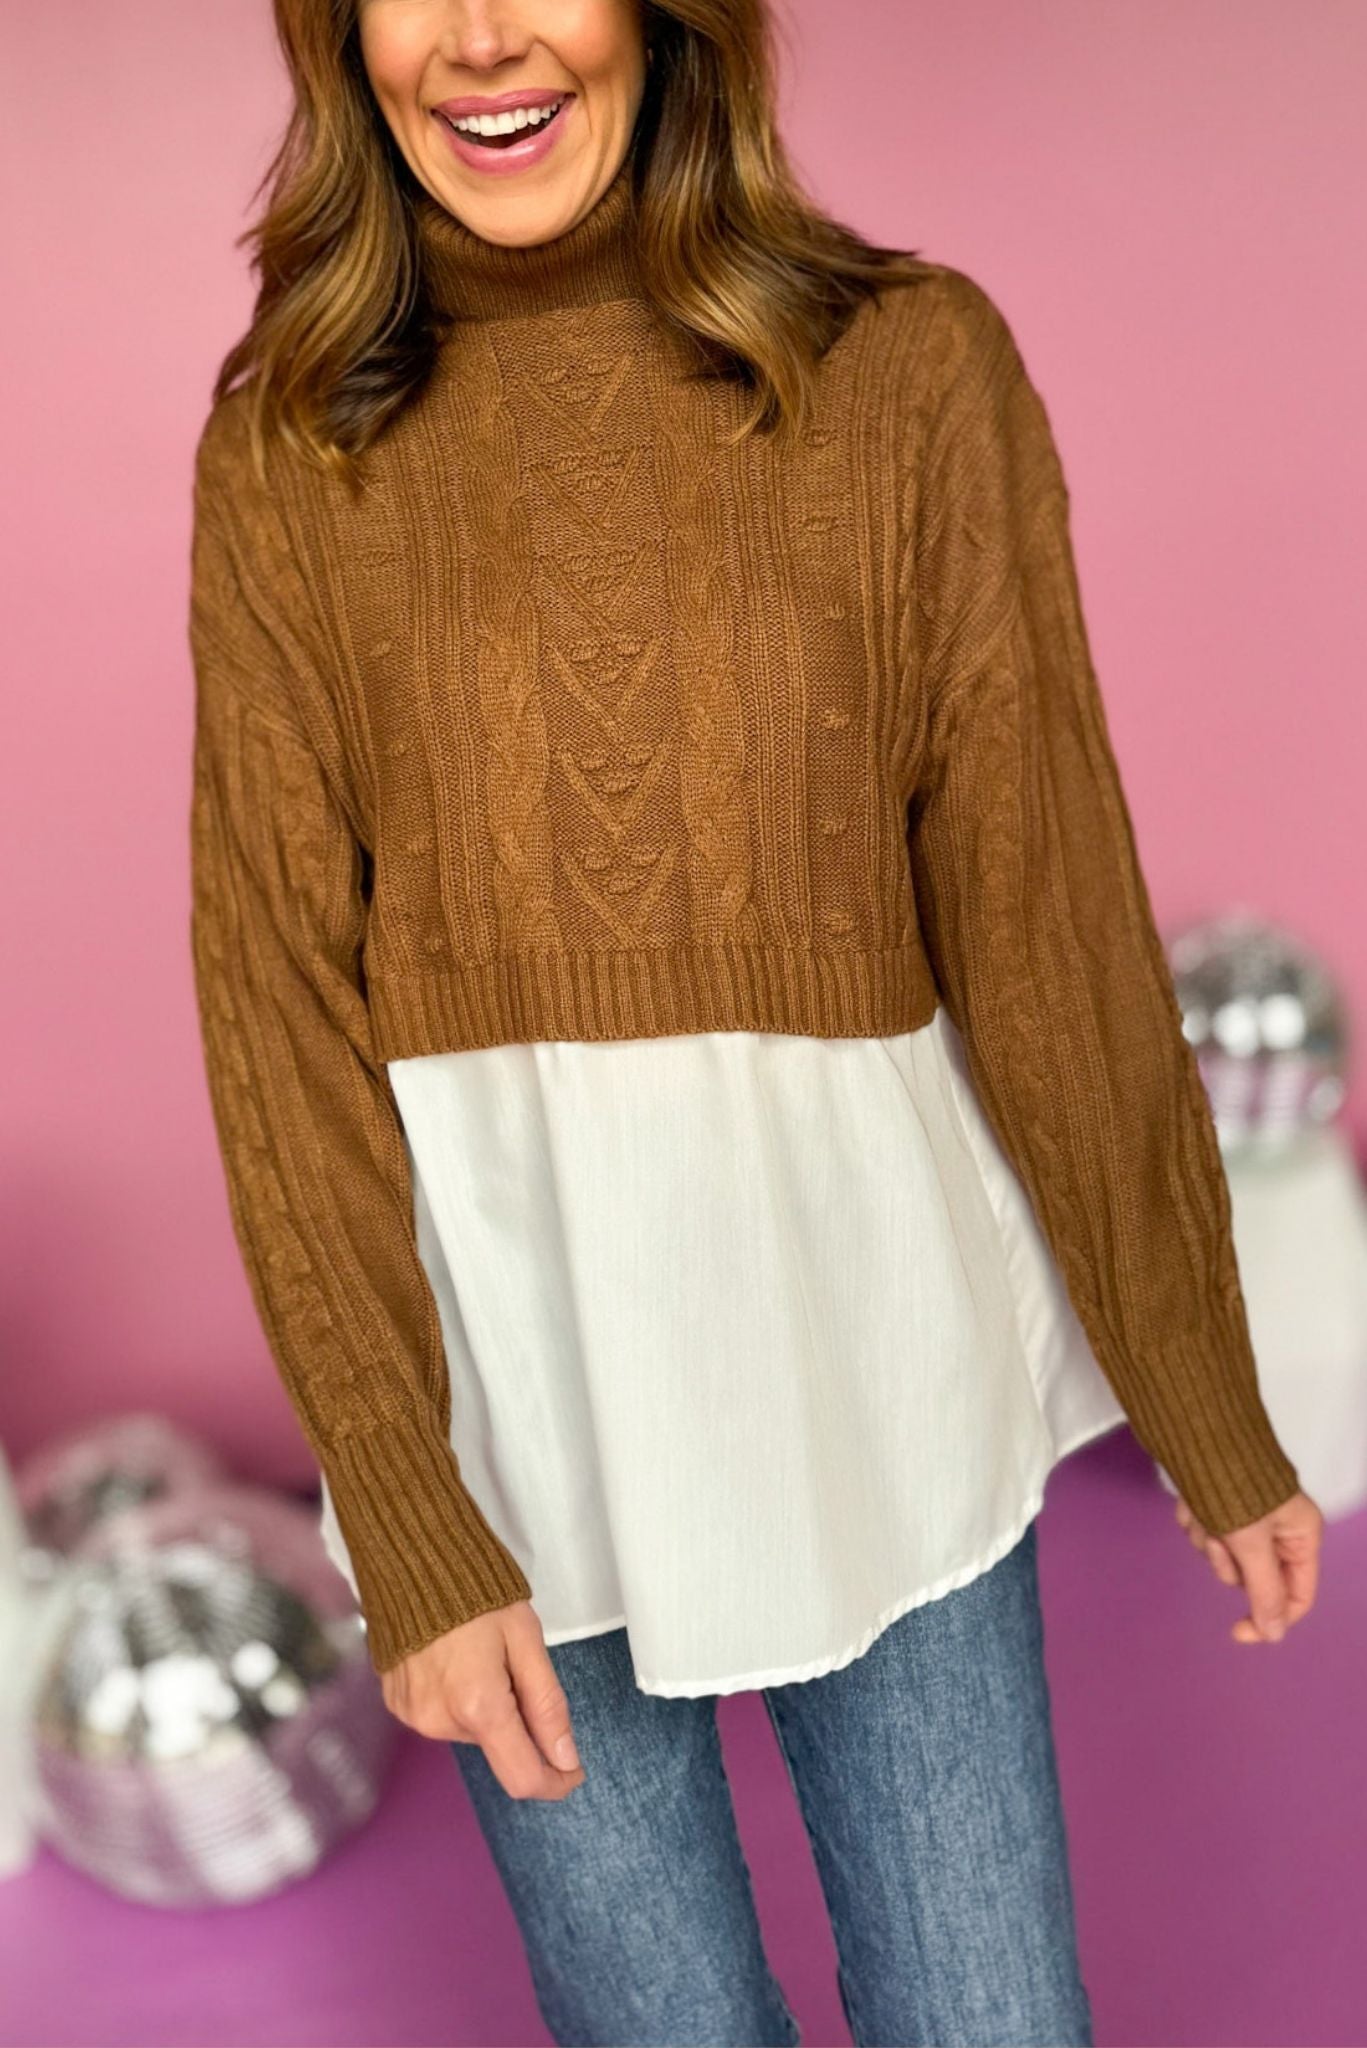 Brown Turtleneck Mixed Media Cable Knit Top, must have top, must have style, fall style, fall fashion, elevated style, elevated top, mom style, fall collection, fall top, shop style your senses by mallory fitzsimmons